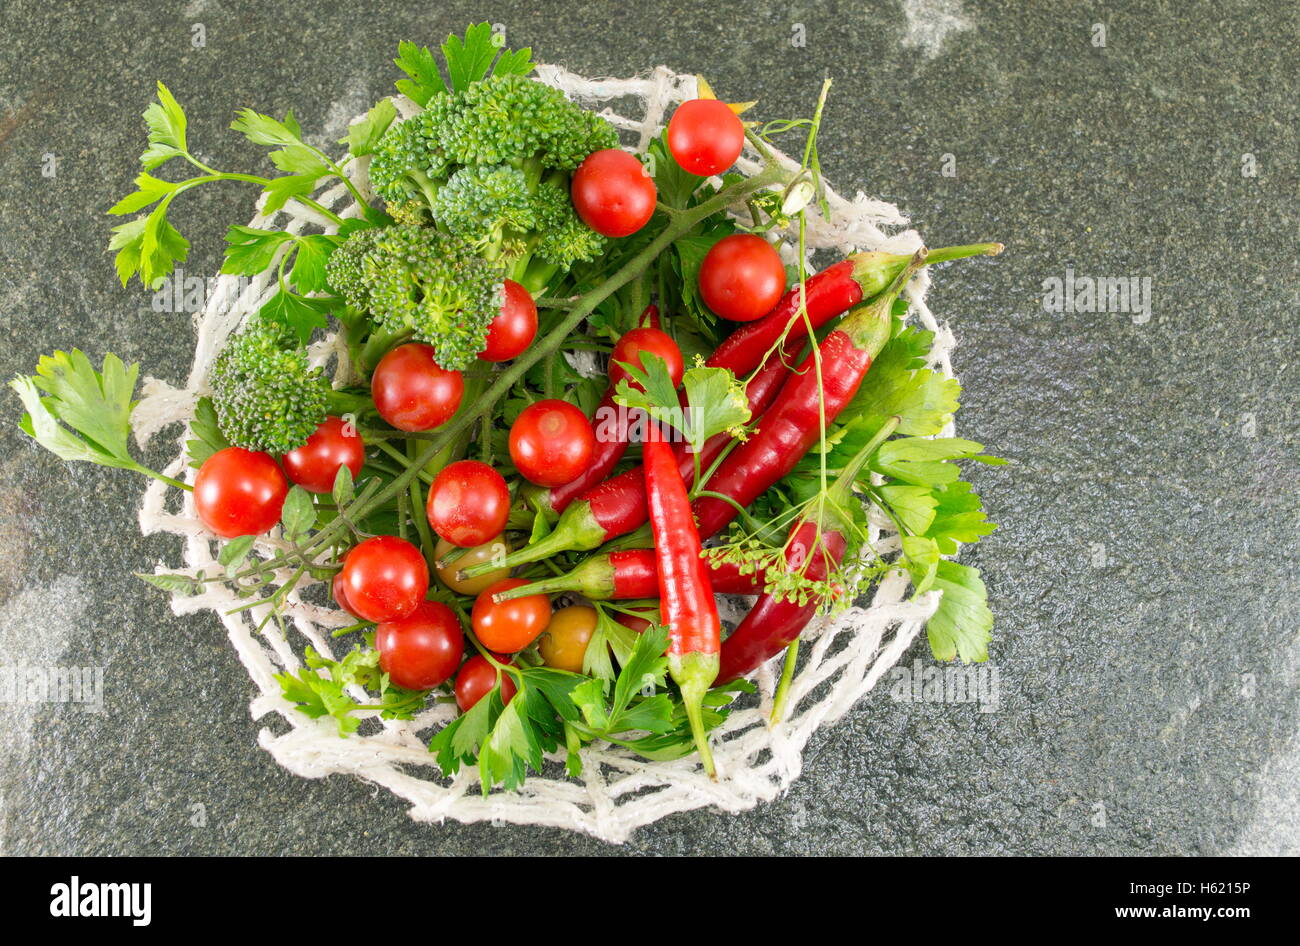 Raw tomato and red pepper on stone background Stock Photo